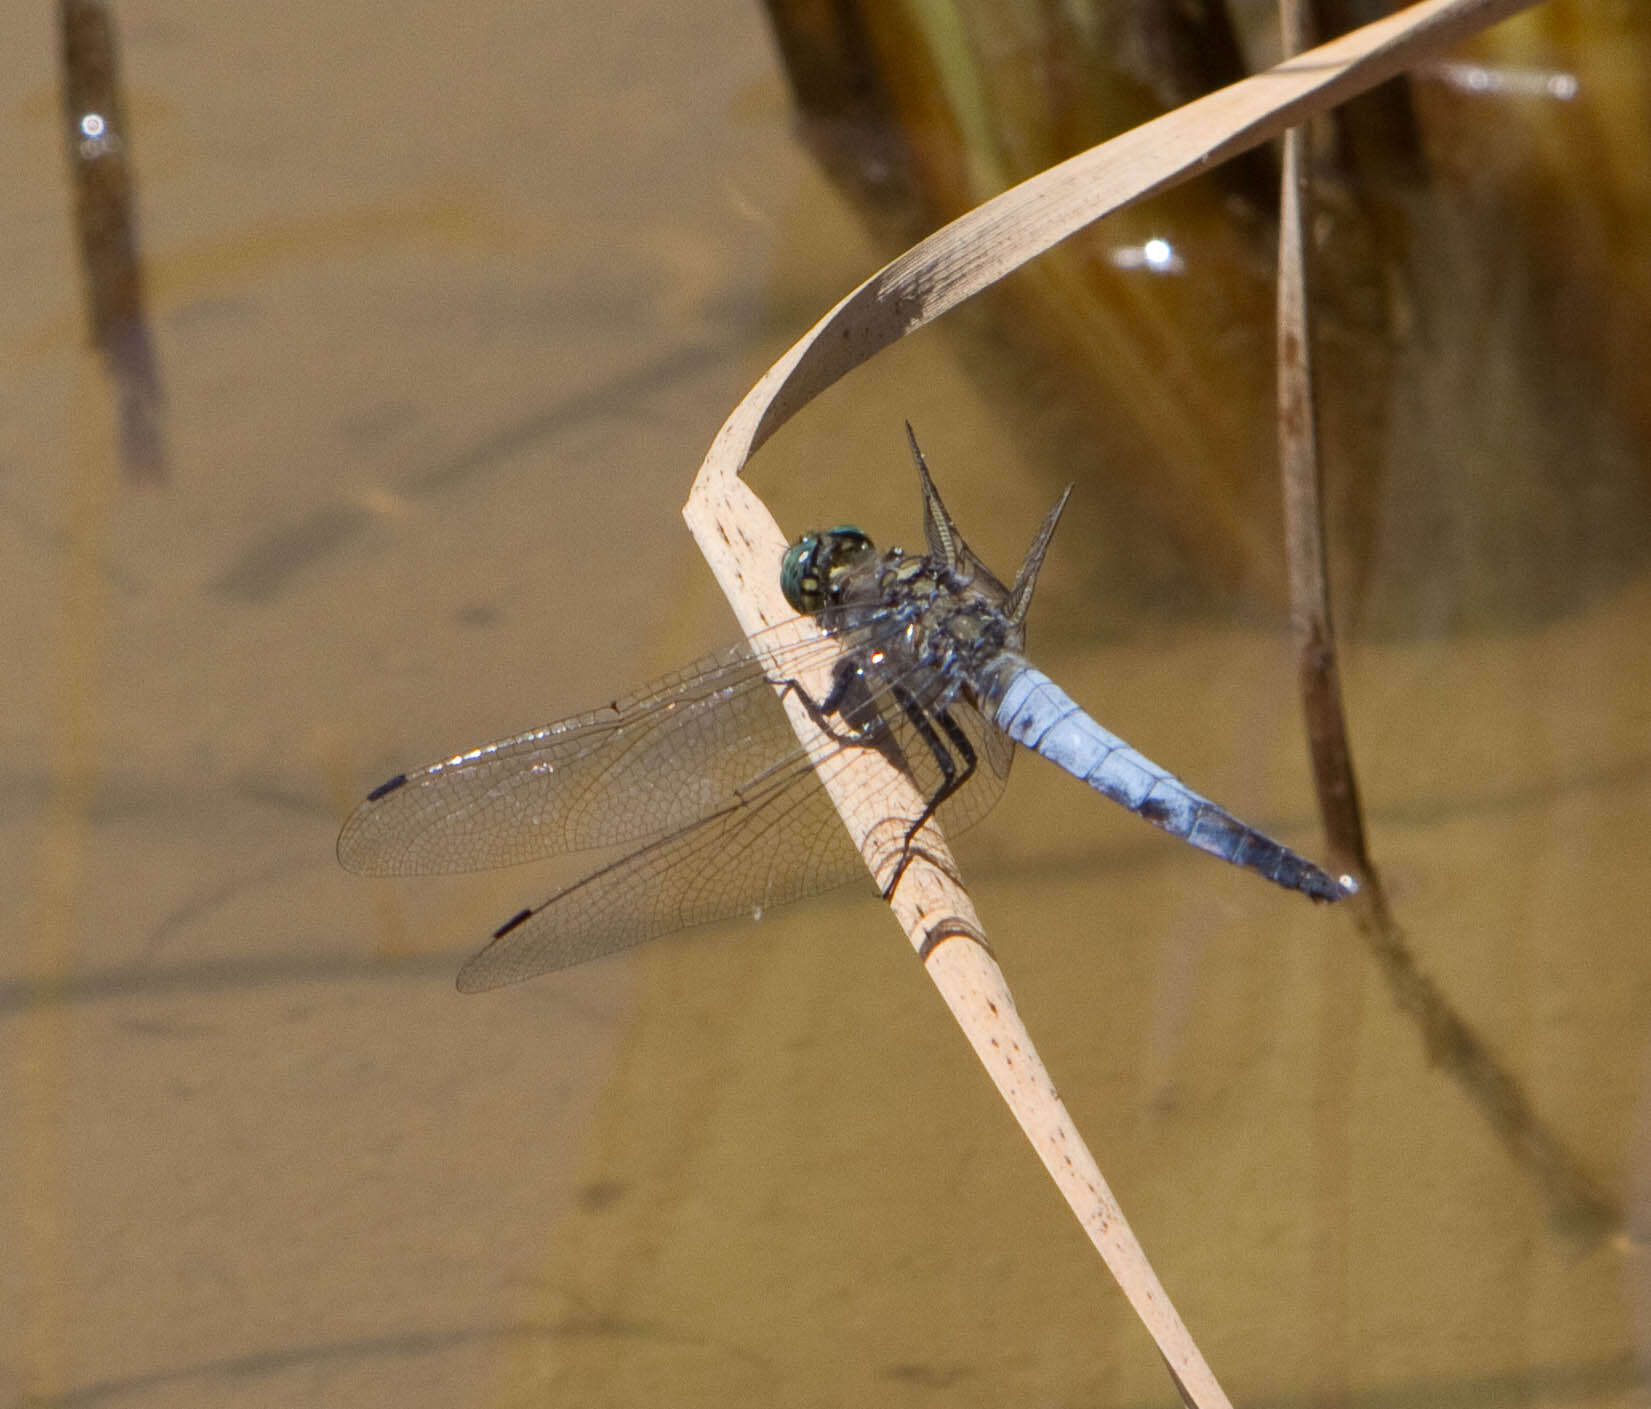 Image of Skimmers (Dragonflies)